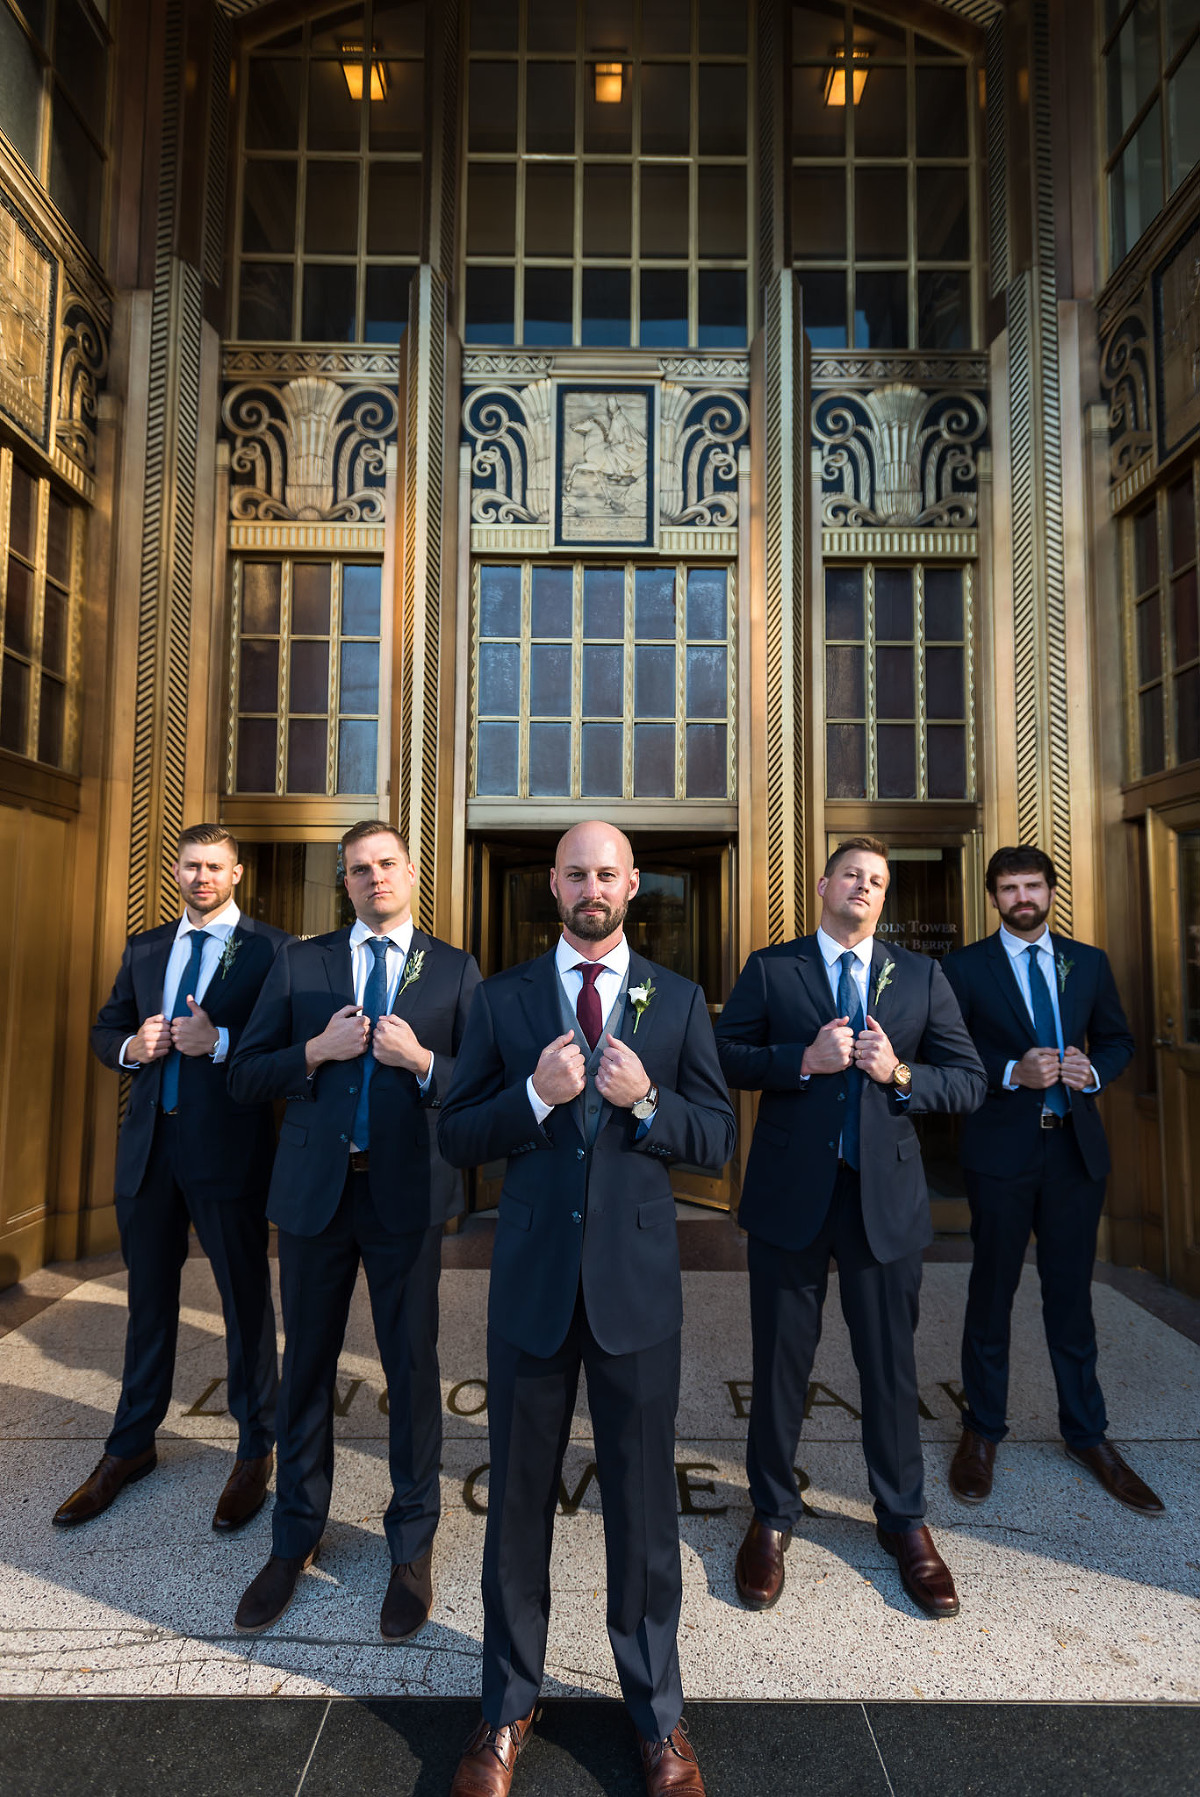 Bridal party portraits, groomsmen, wedding party, Fort Wayne Bride, downtown Fort Wayne, Lincoln Tower Bank, Allen County Courthouse, Fort Wayne, Indiana wedding photography by Kasey Wallace Photography